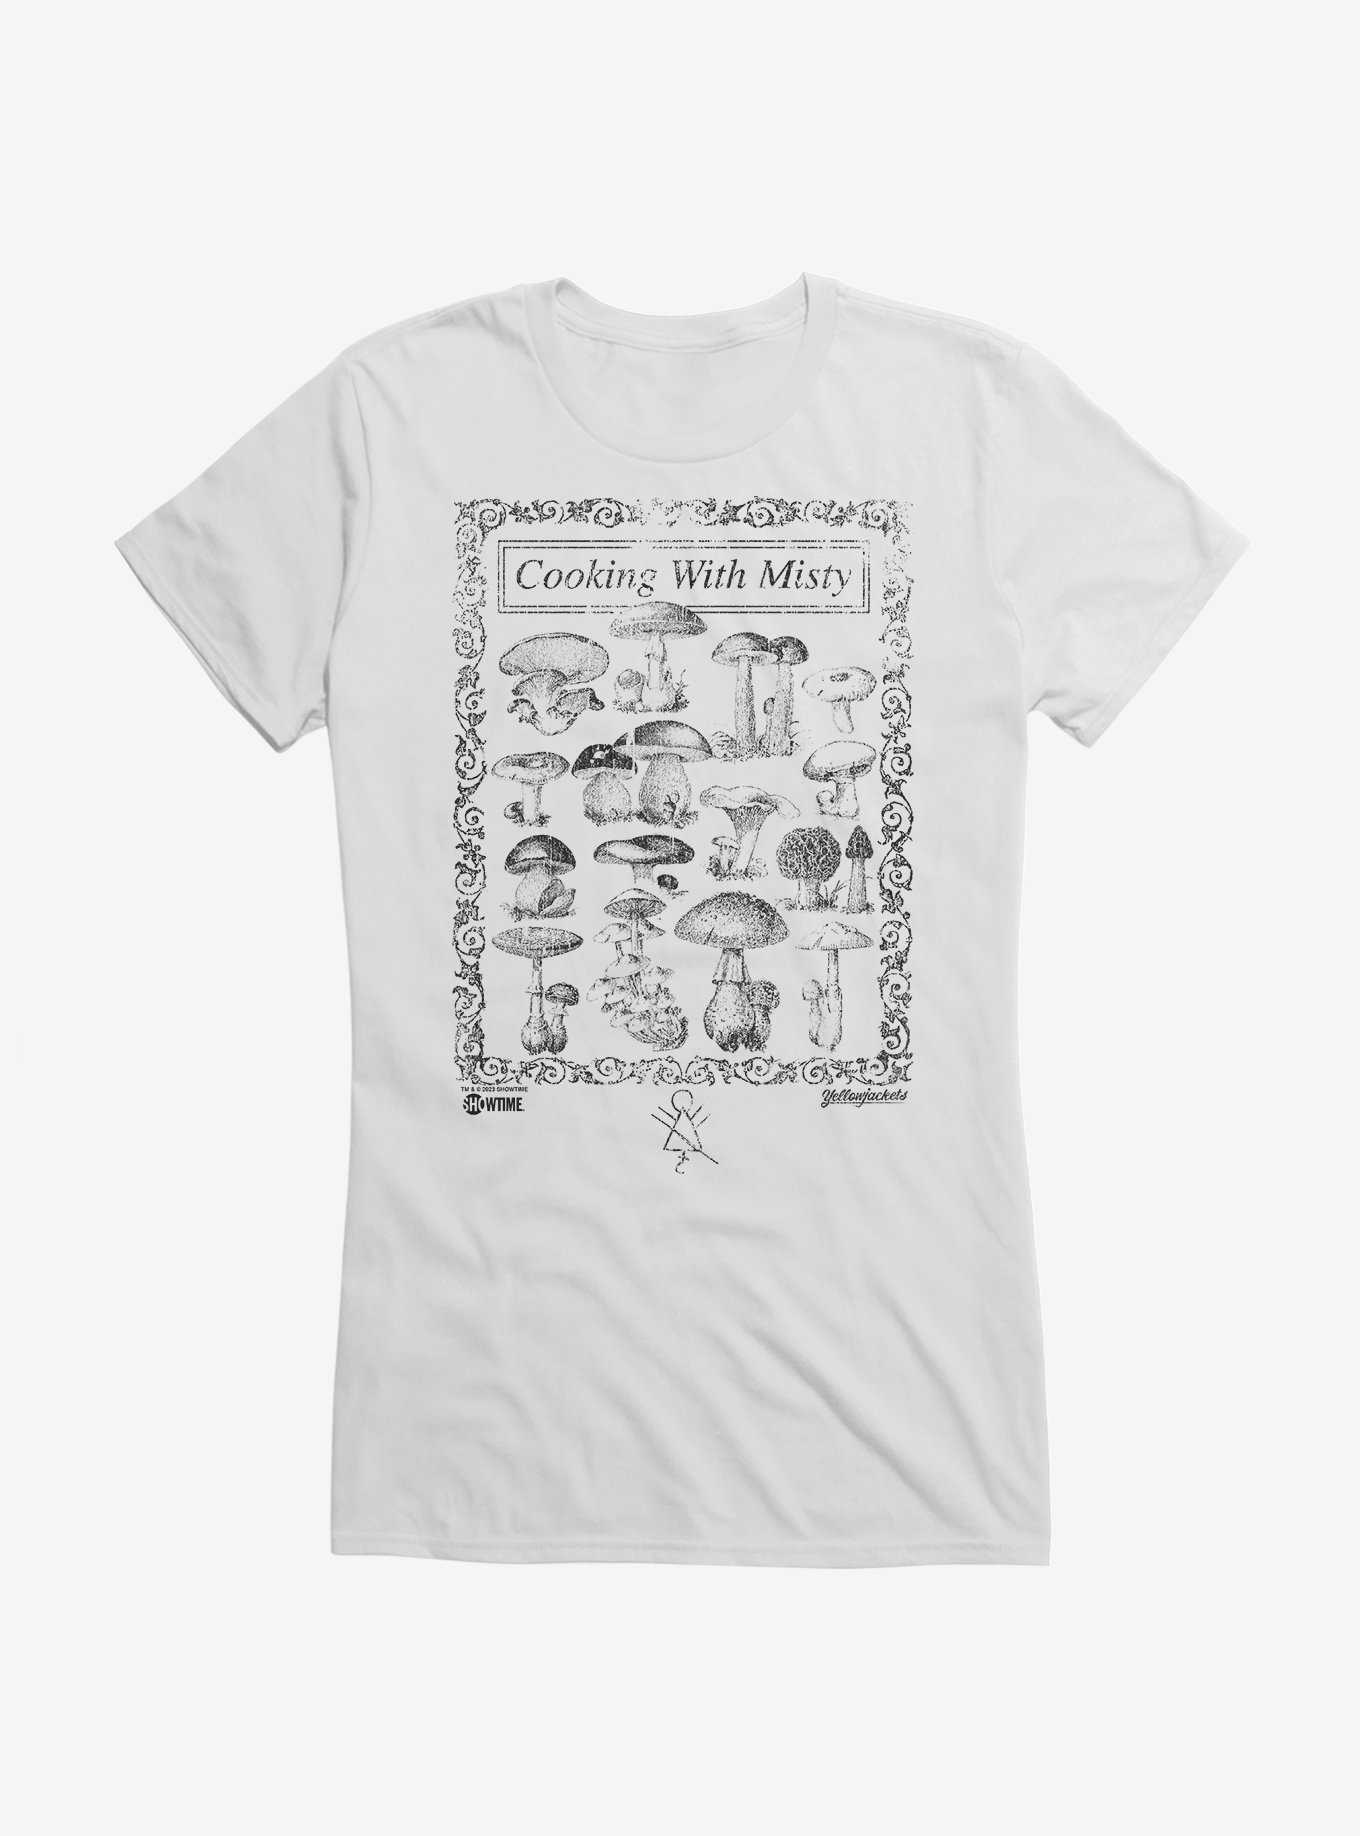 Yellowjackets Cooking With Misty Mushroom Girls T-Shirt, , hi-res